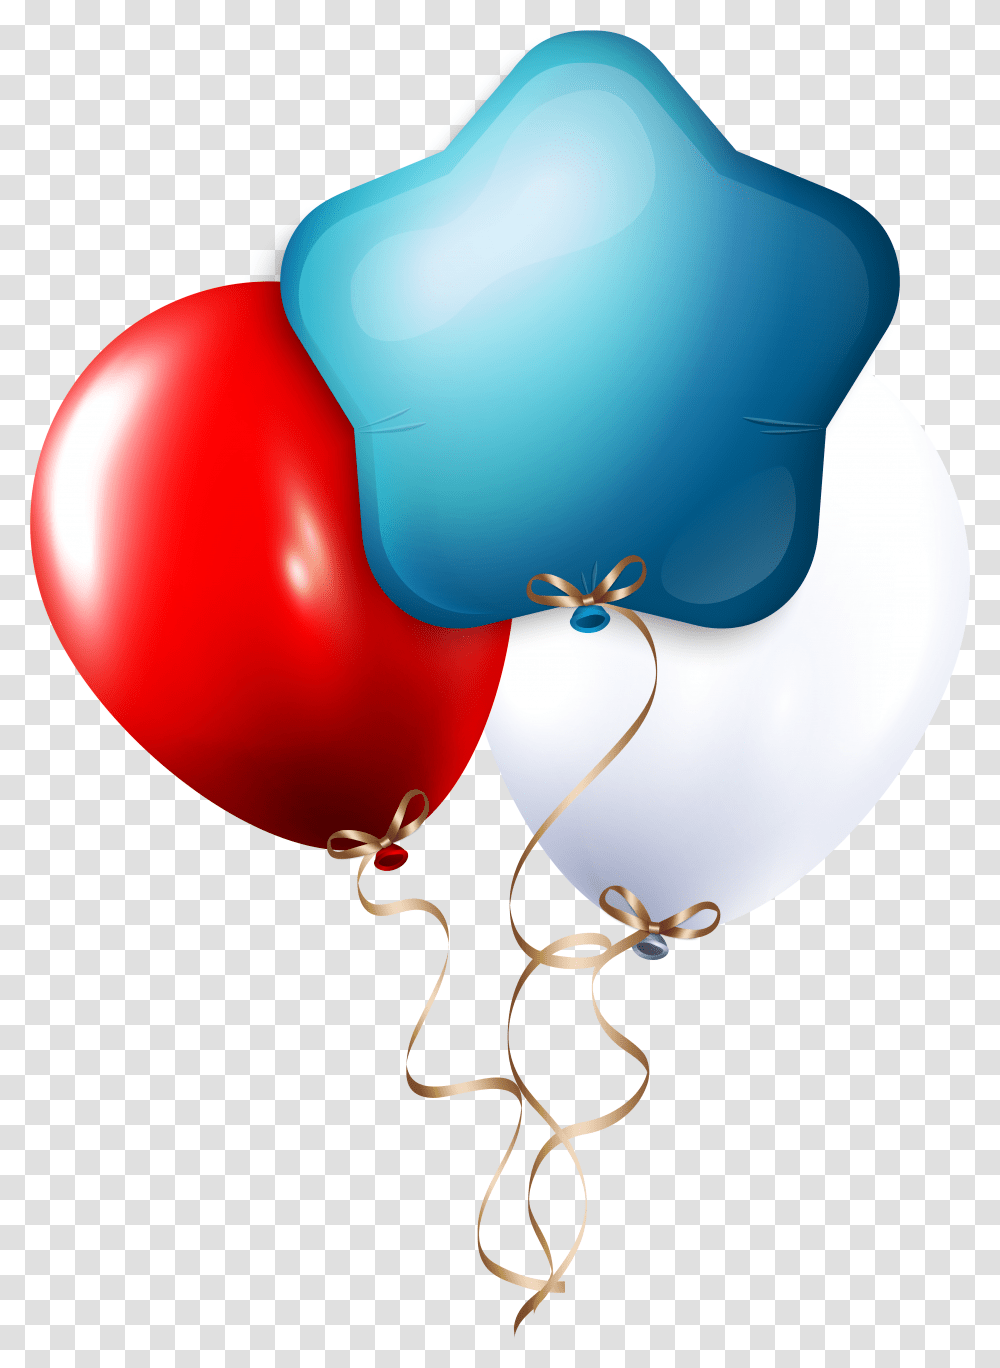 Balloons Clipart Balloon Red Blue Transparent Png